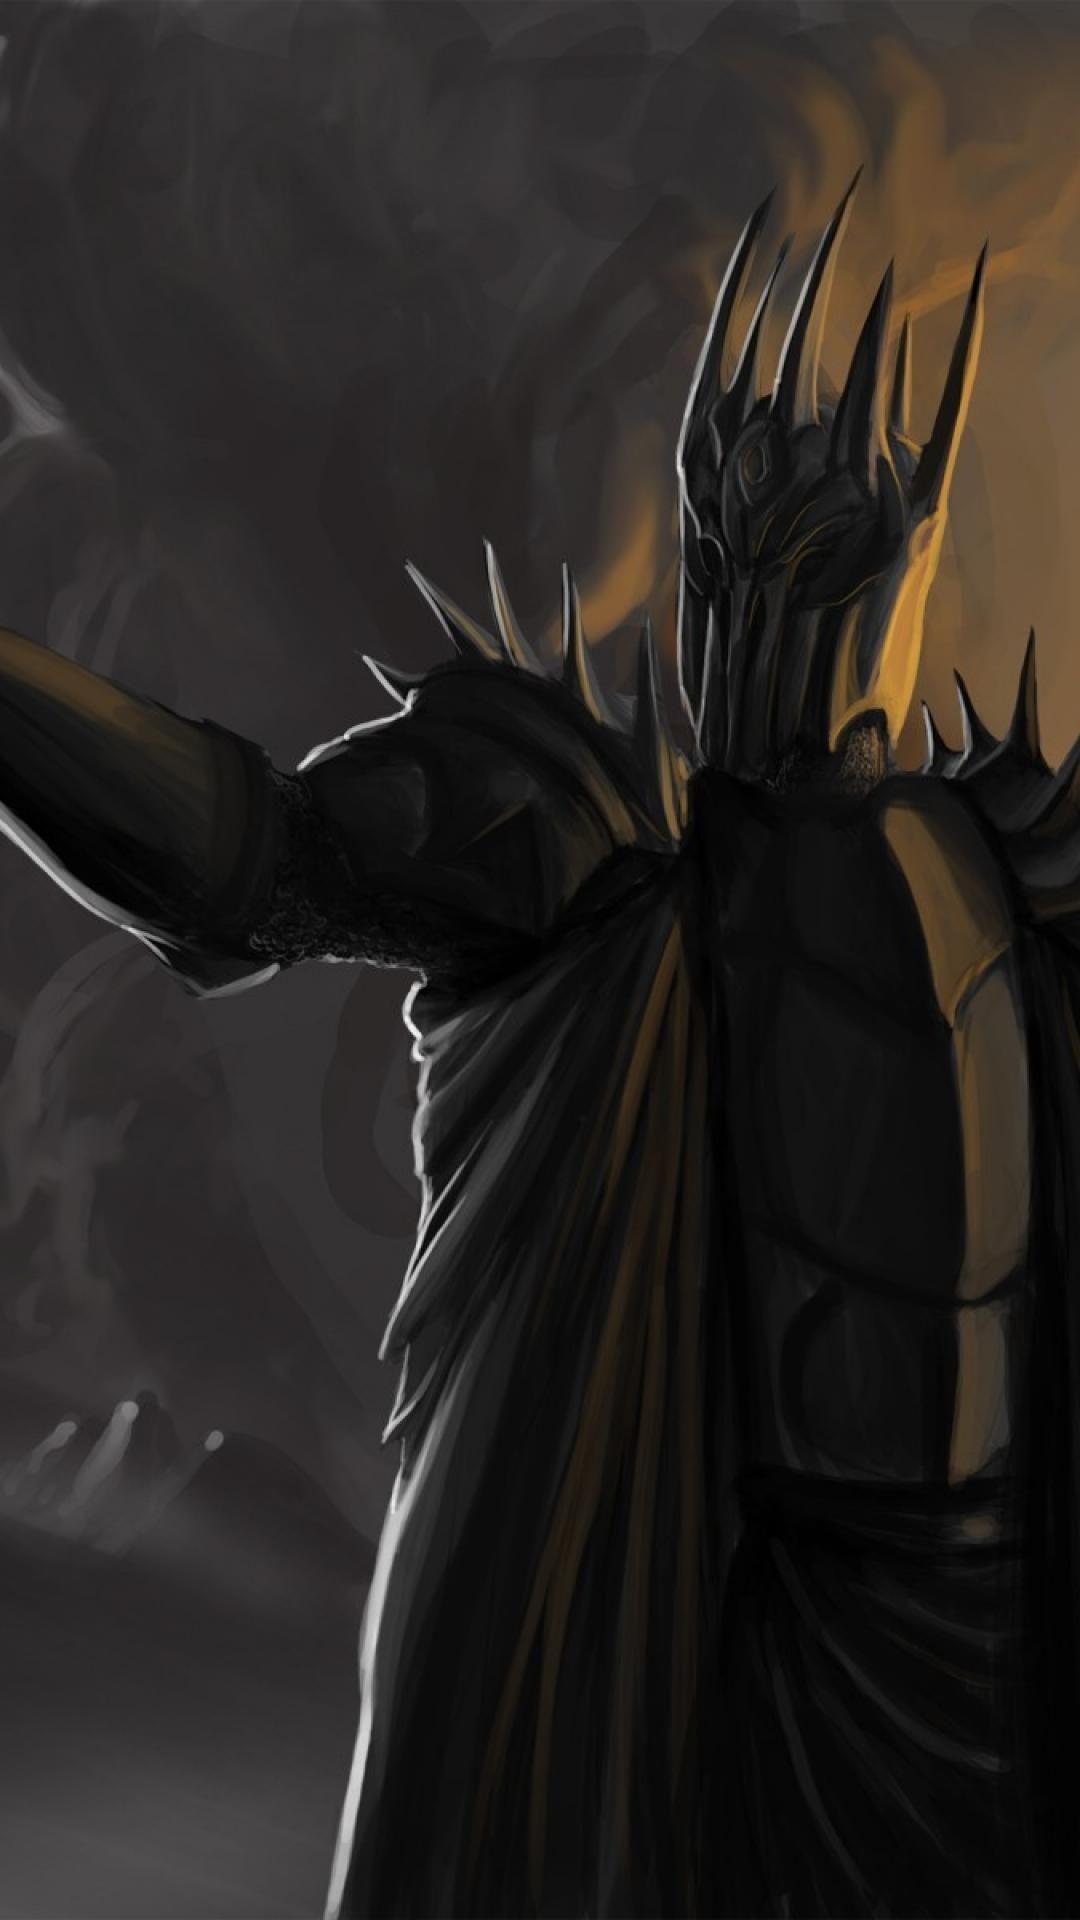 Sauron the lord of rings artwork wallpaper